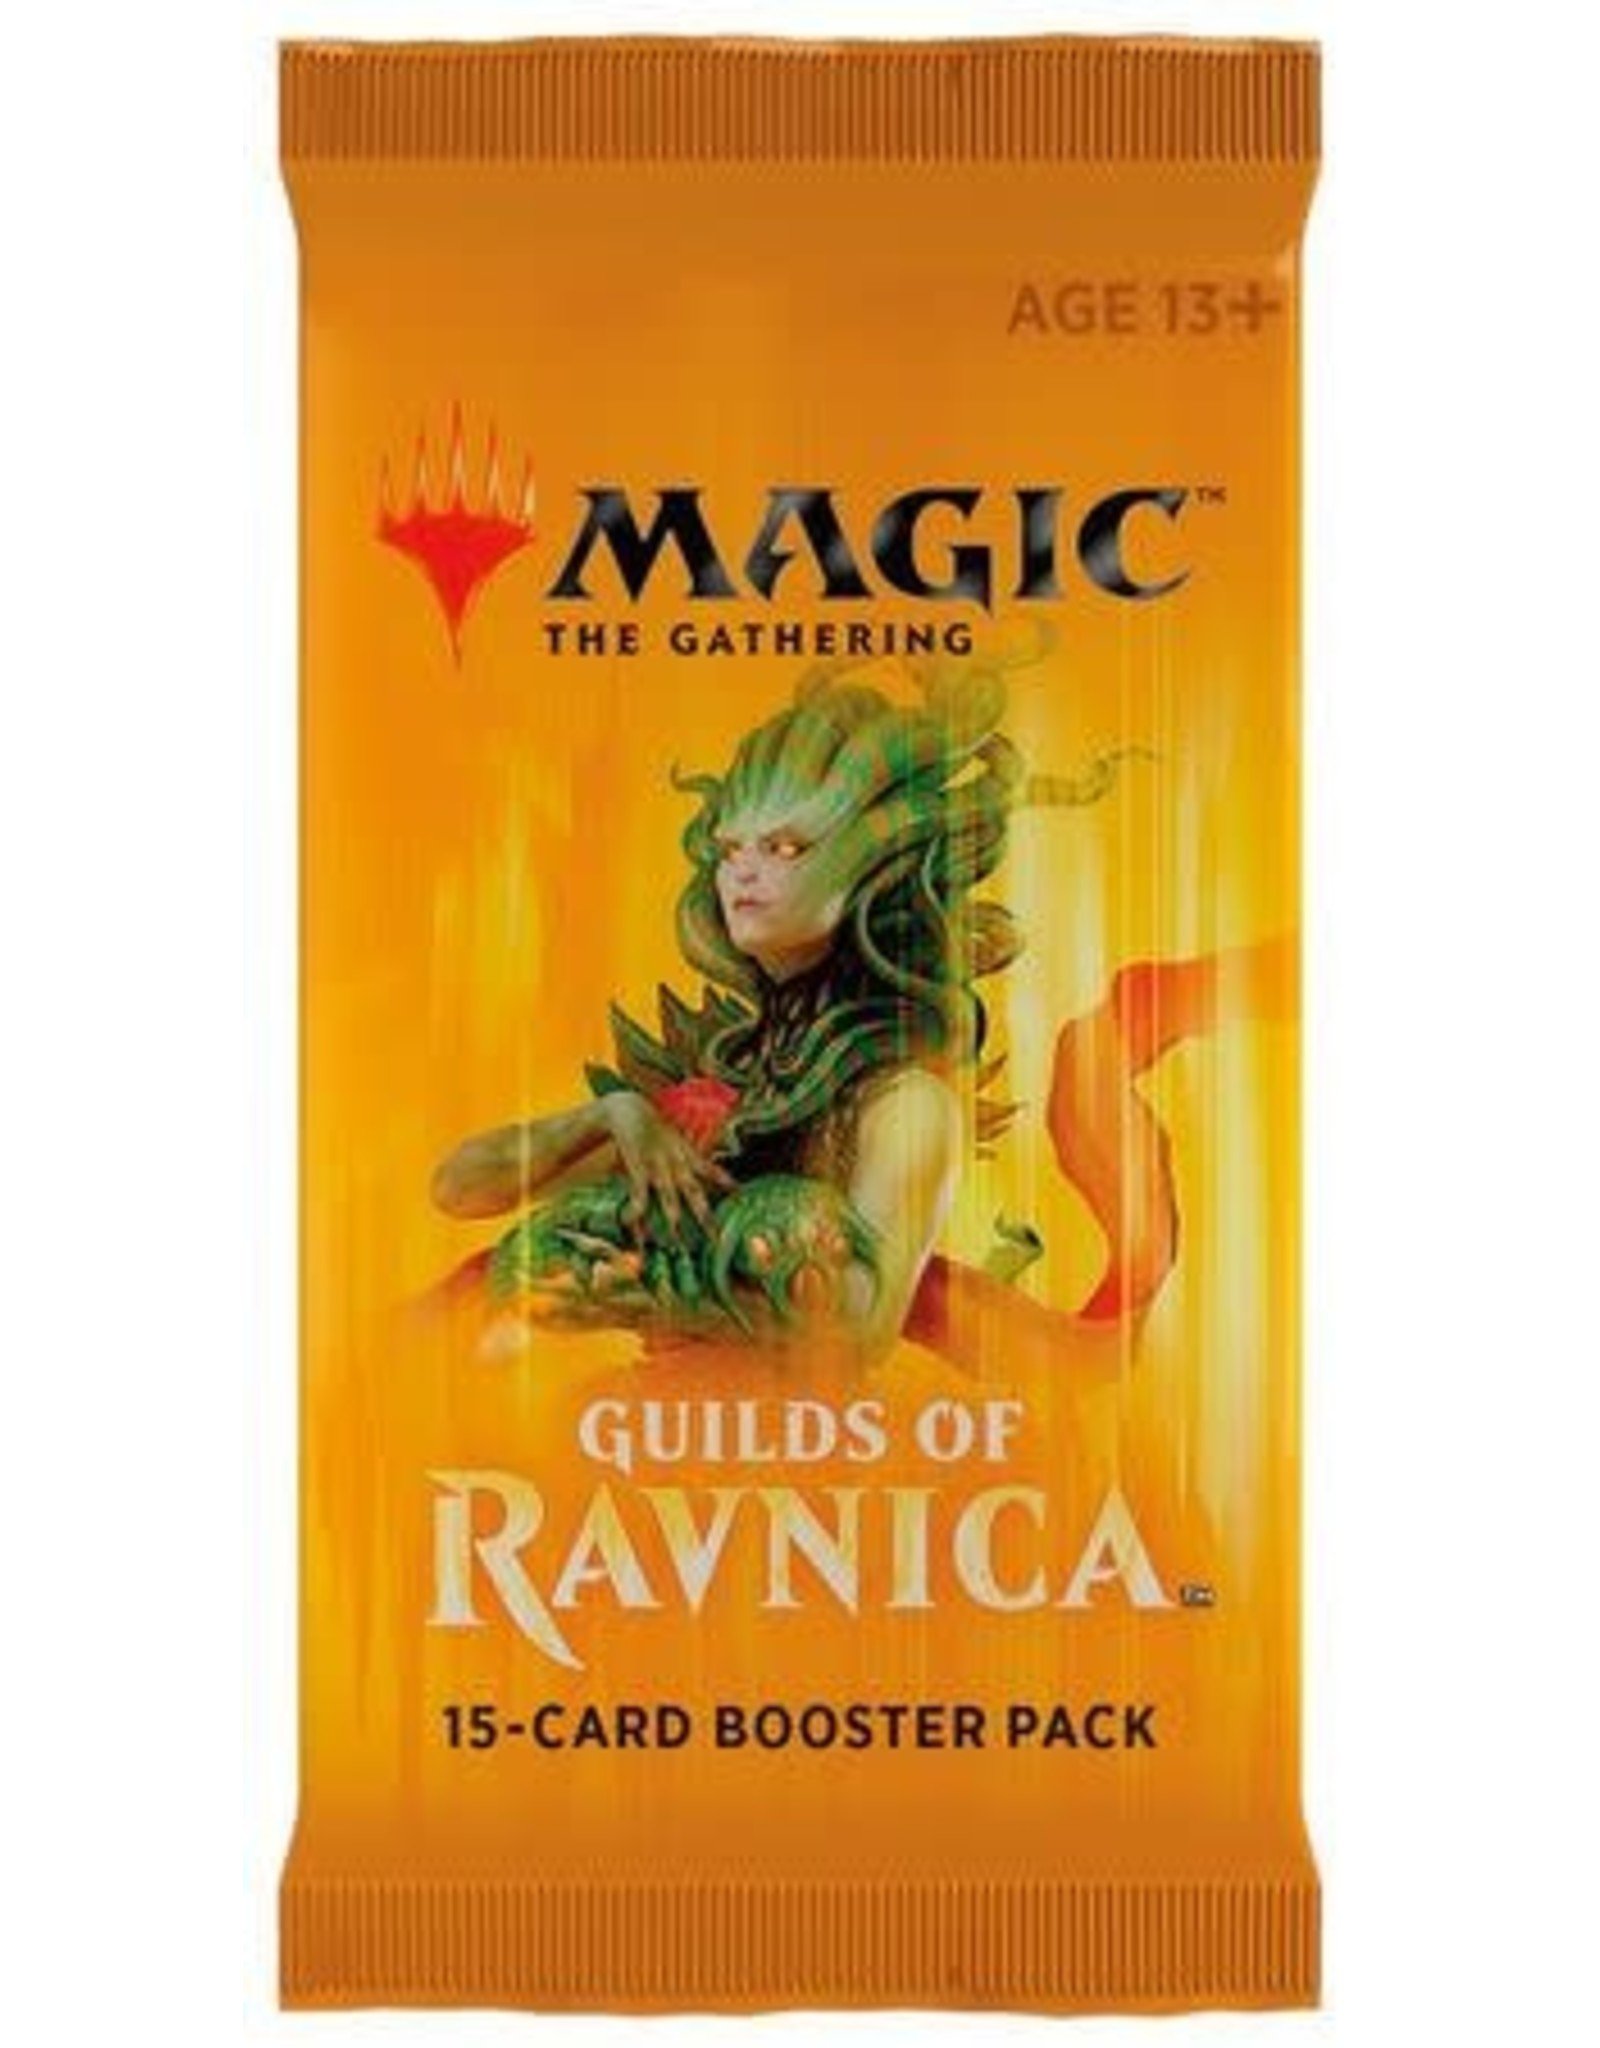 Wizards of the Coast Guilds of Ravnica Booster Pack